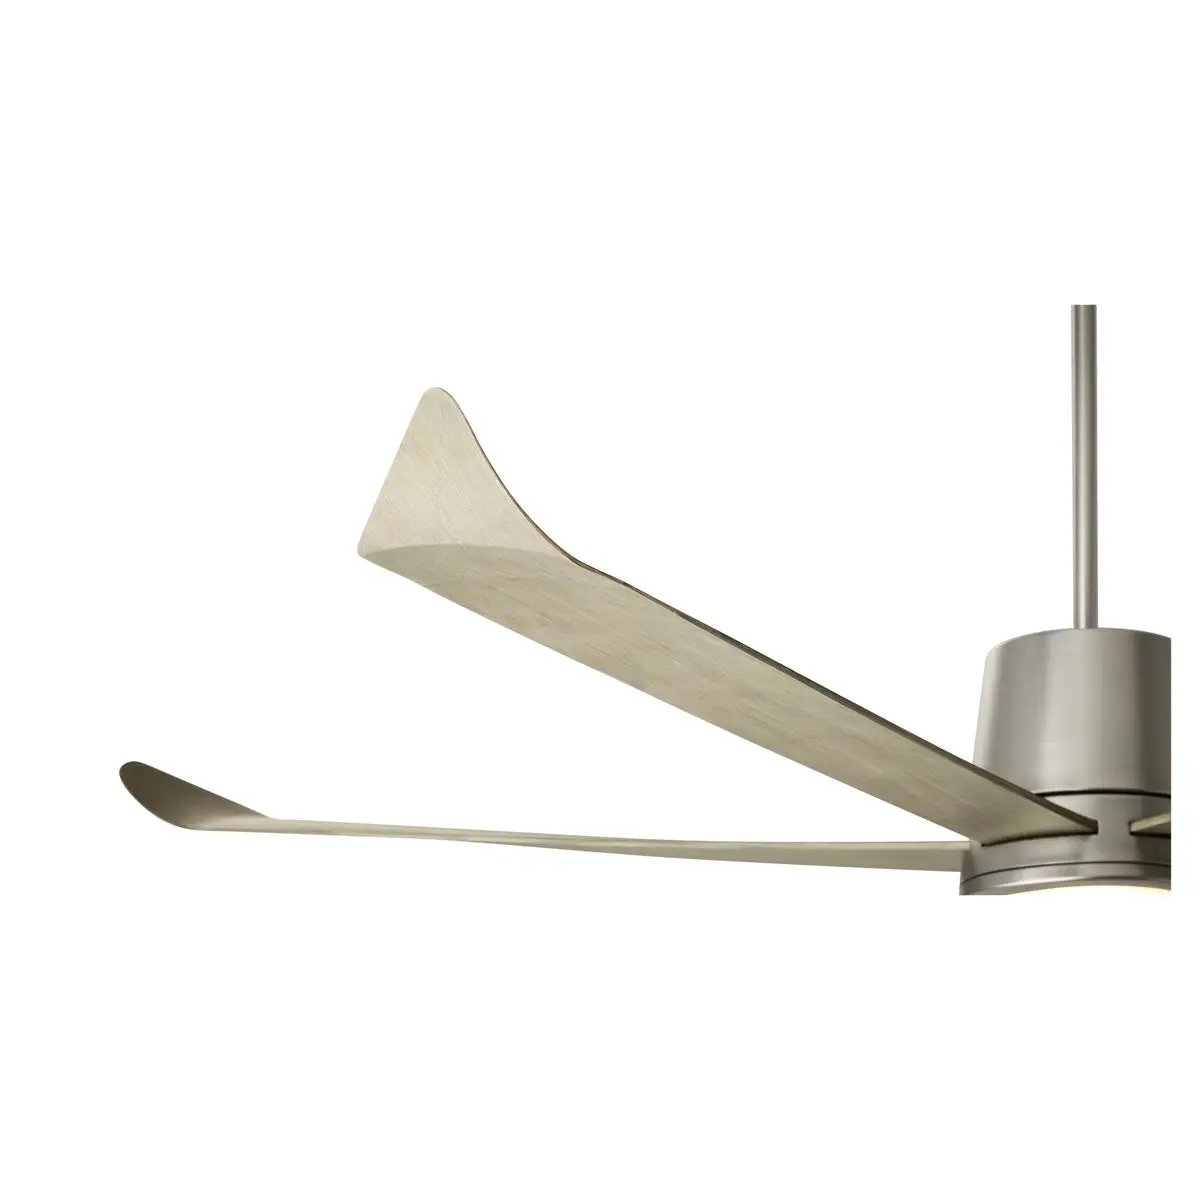 Smart Ceiling Fan with elongated upturned blades, optional light kits available. Elevate any room with this Quorum International fan.